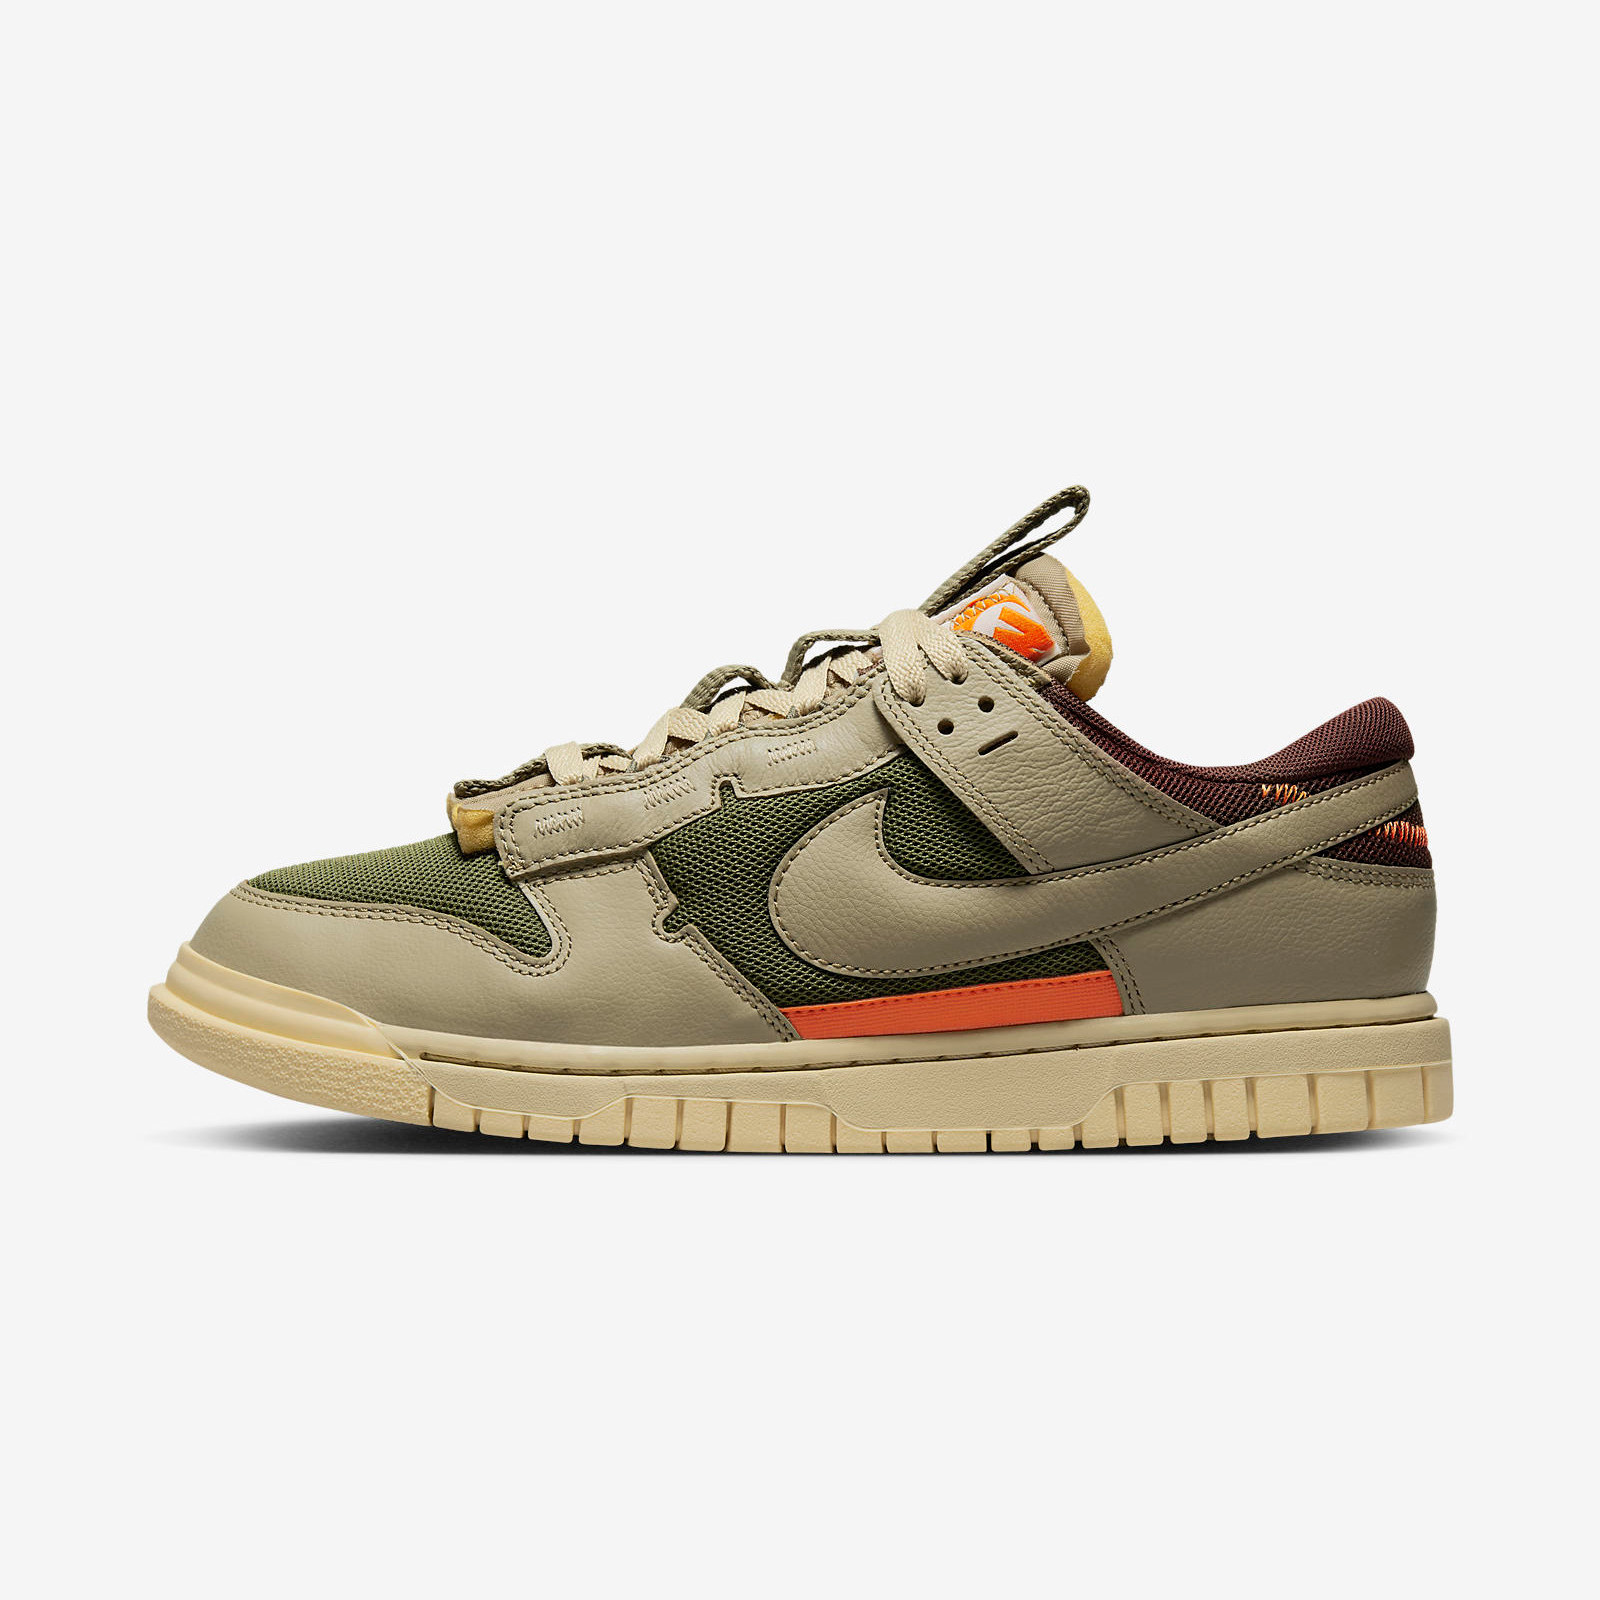 Nike Dunk Low
Remastered Olive